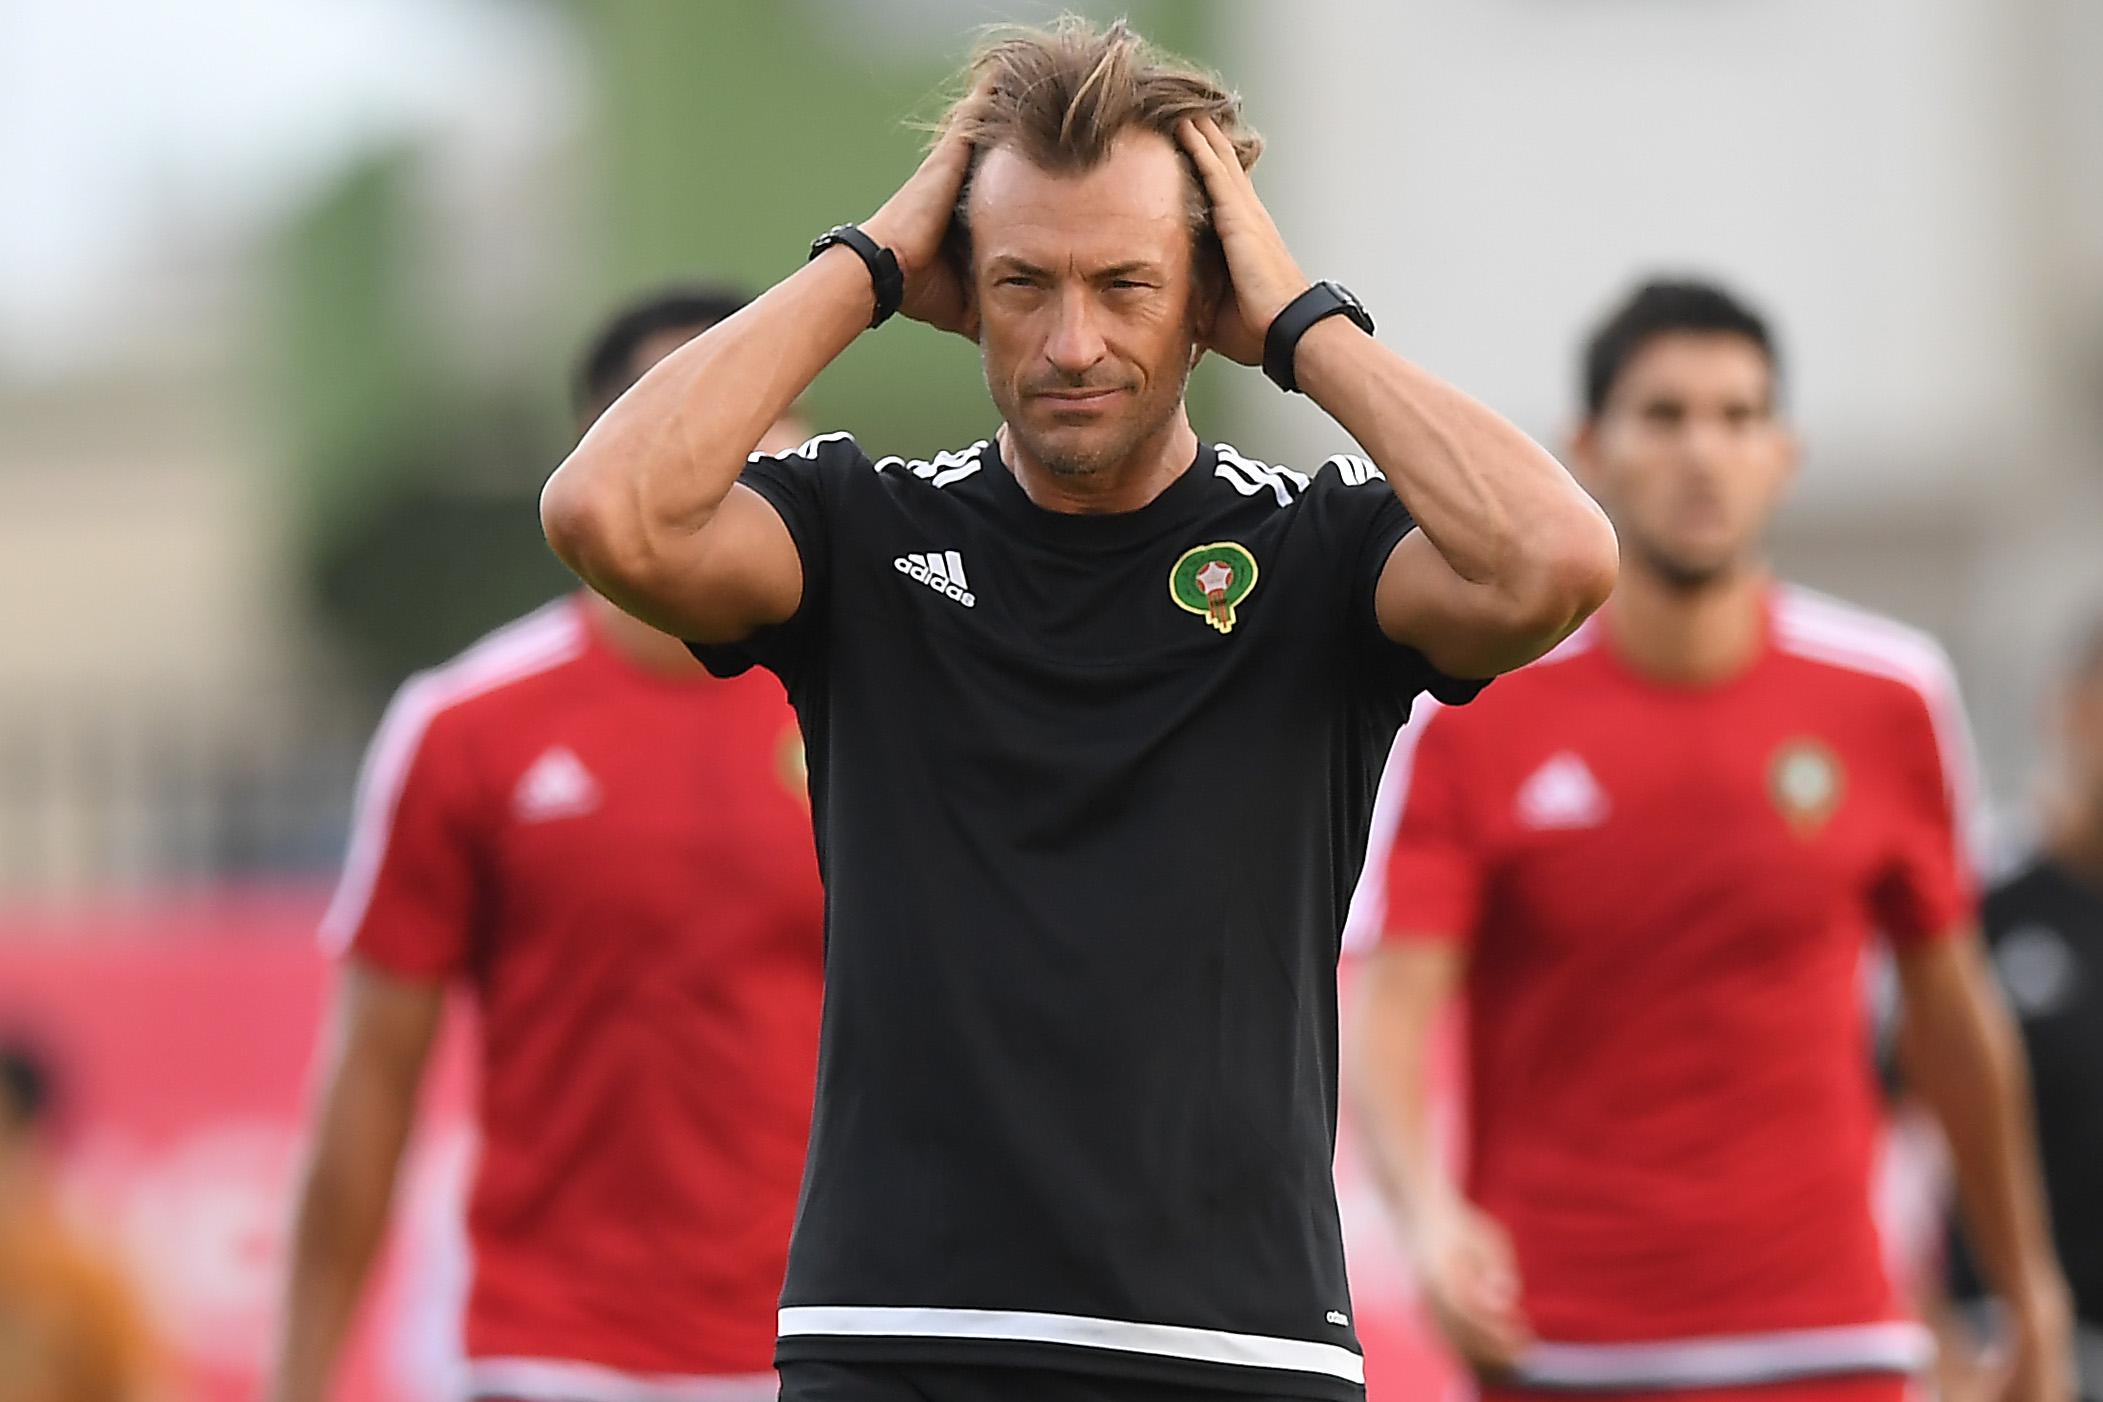 Herve Renard, Morocco's World Cup coach, needs a new gig. What